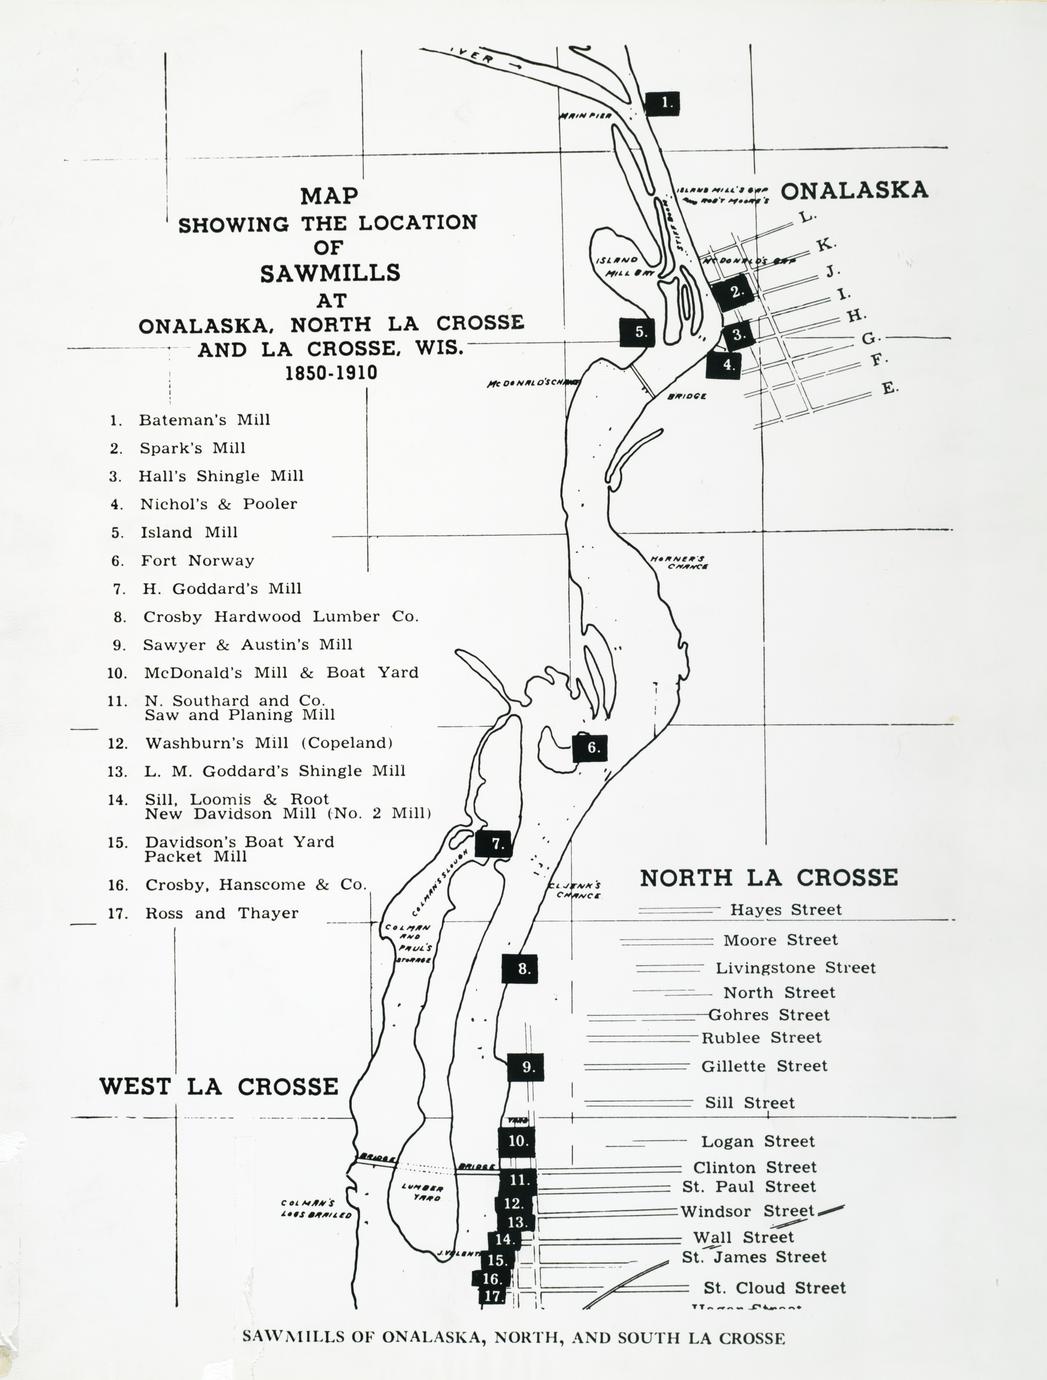 Map showing the location of sawmills at Onalaska, North La Crosse and La Crosse, Wisconsin,1850-1910 (1 of 2)